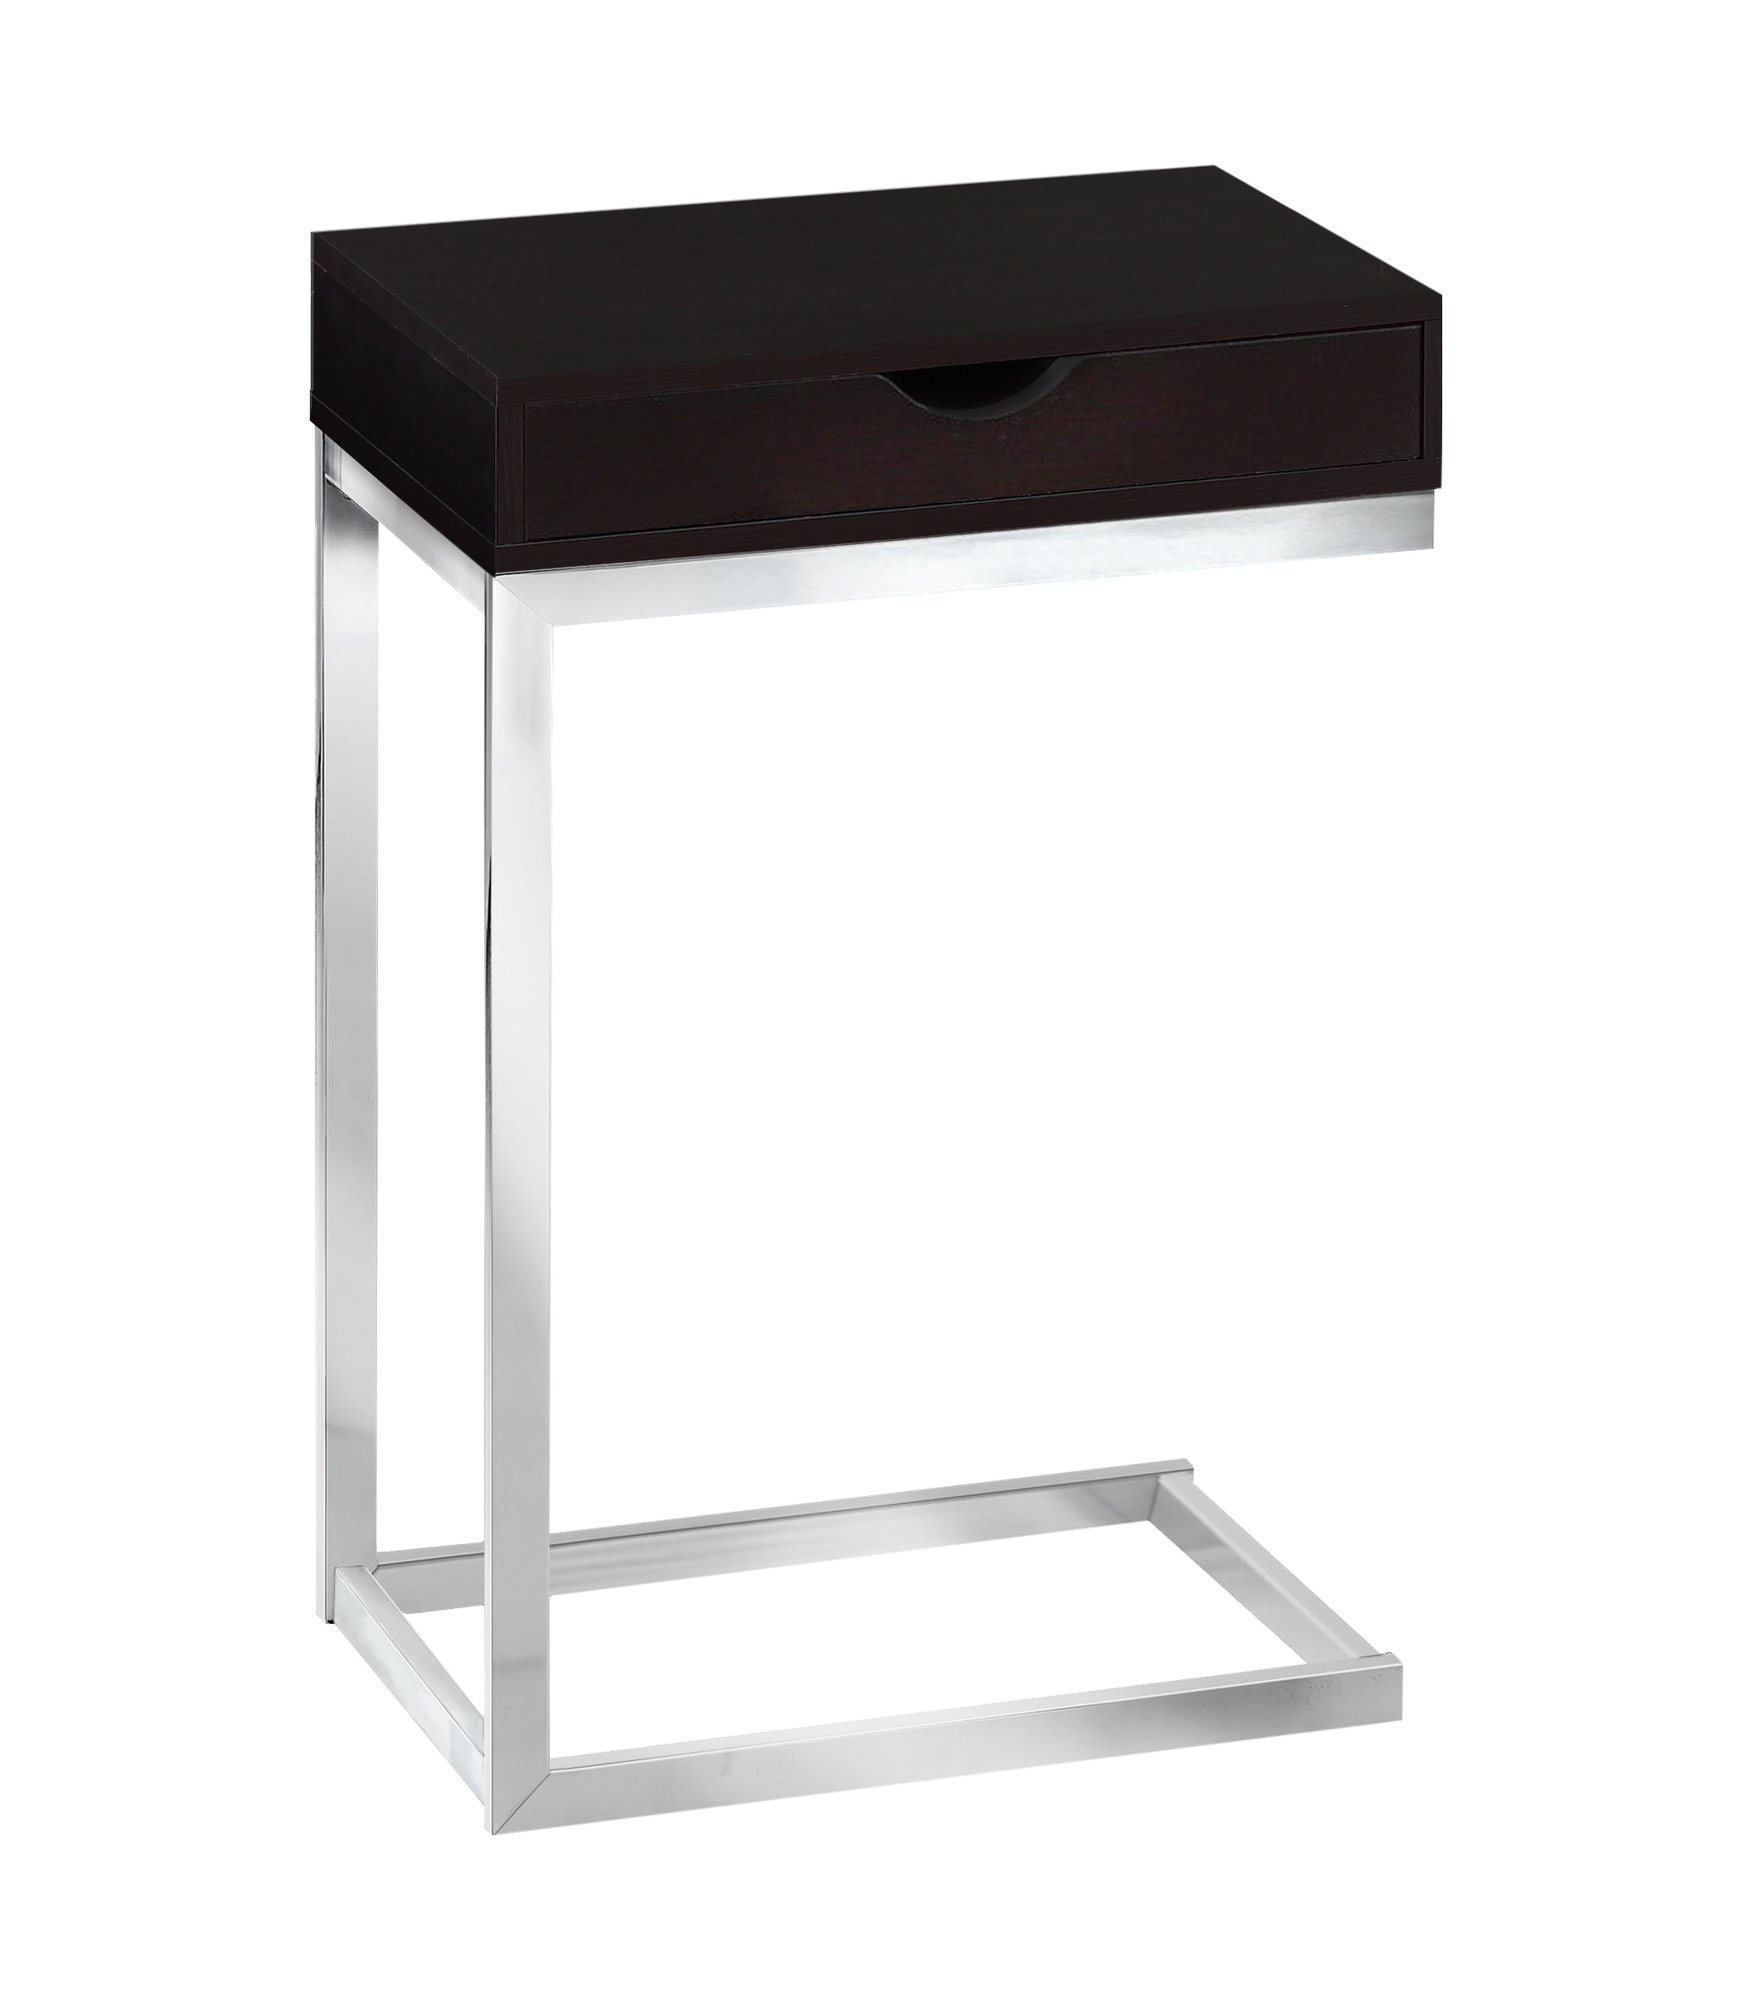 10.25" x 15.75" x 24.5" Cappuccino Finish Metal Accent Table